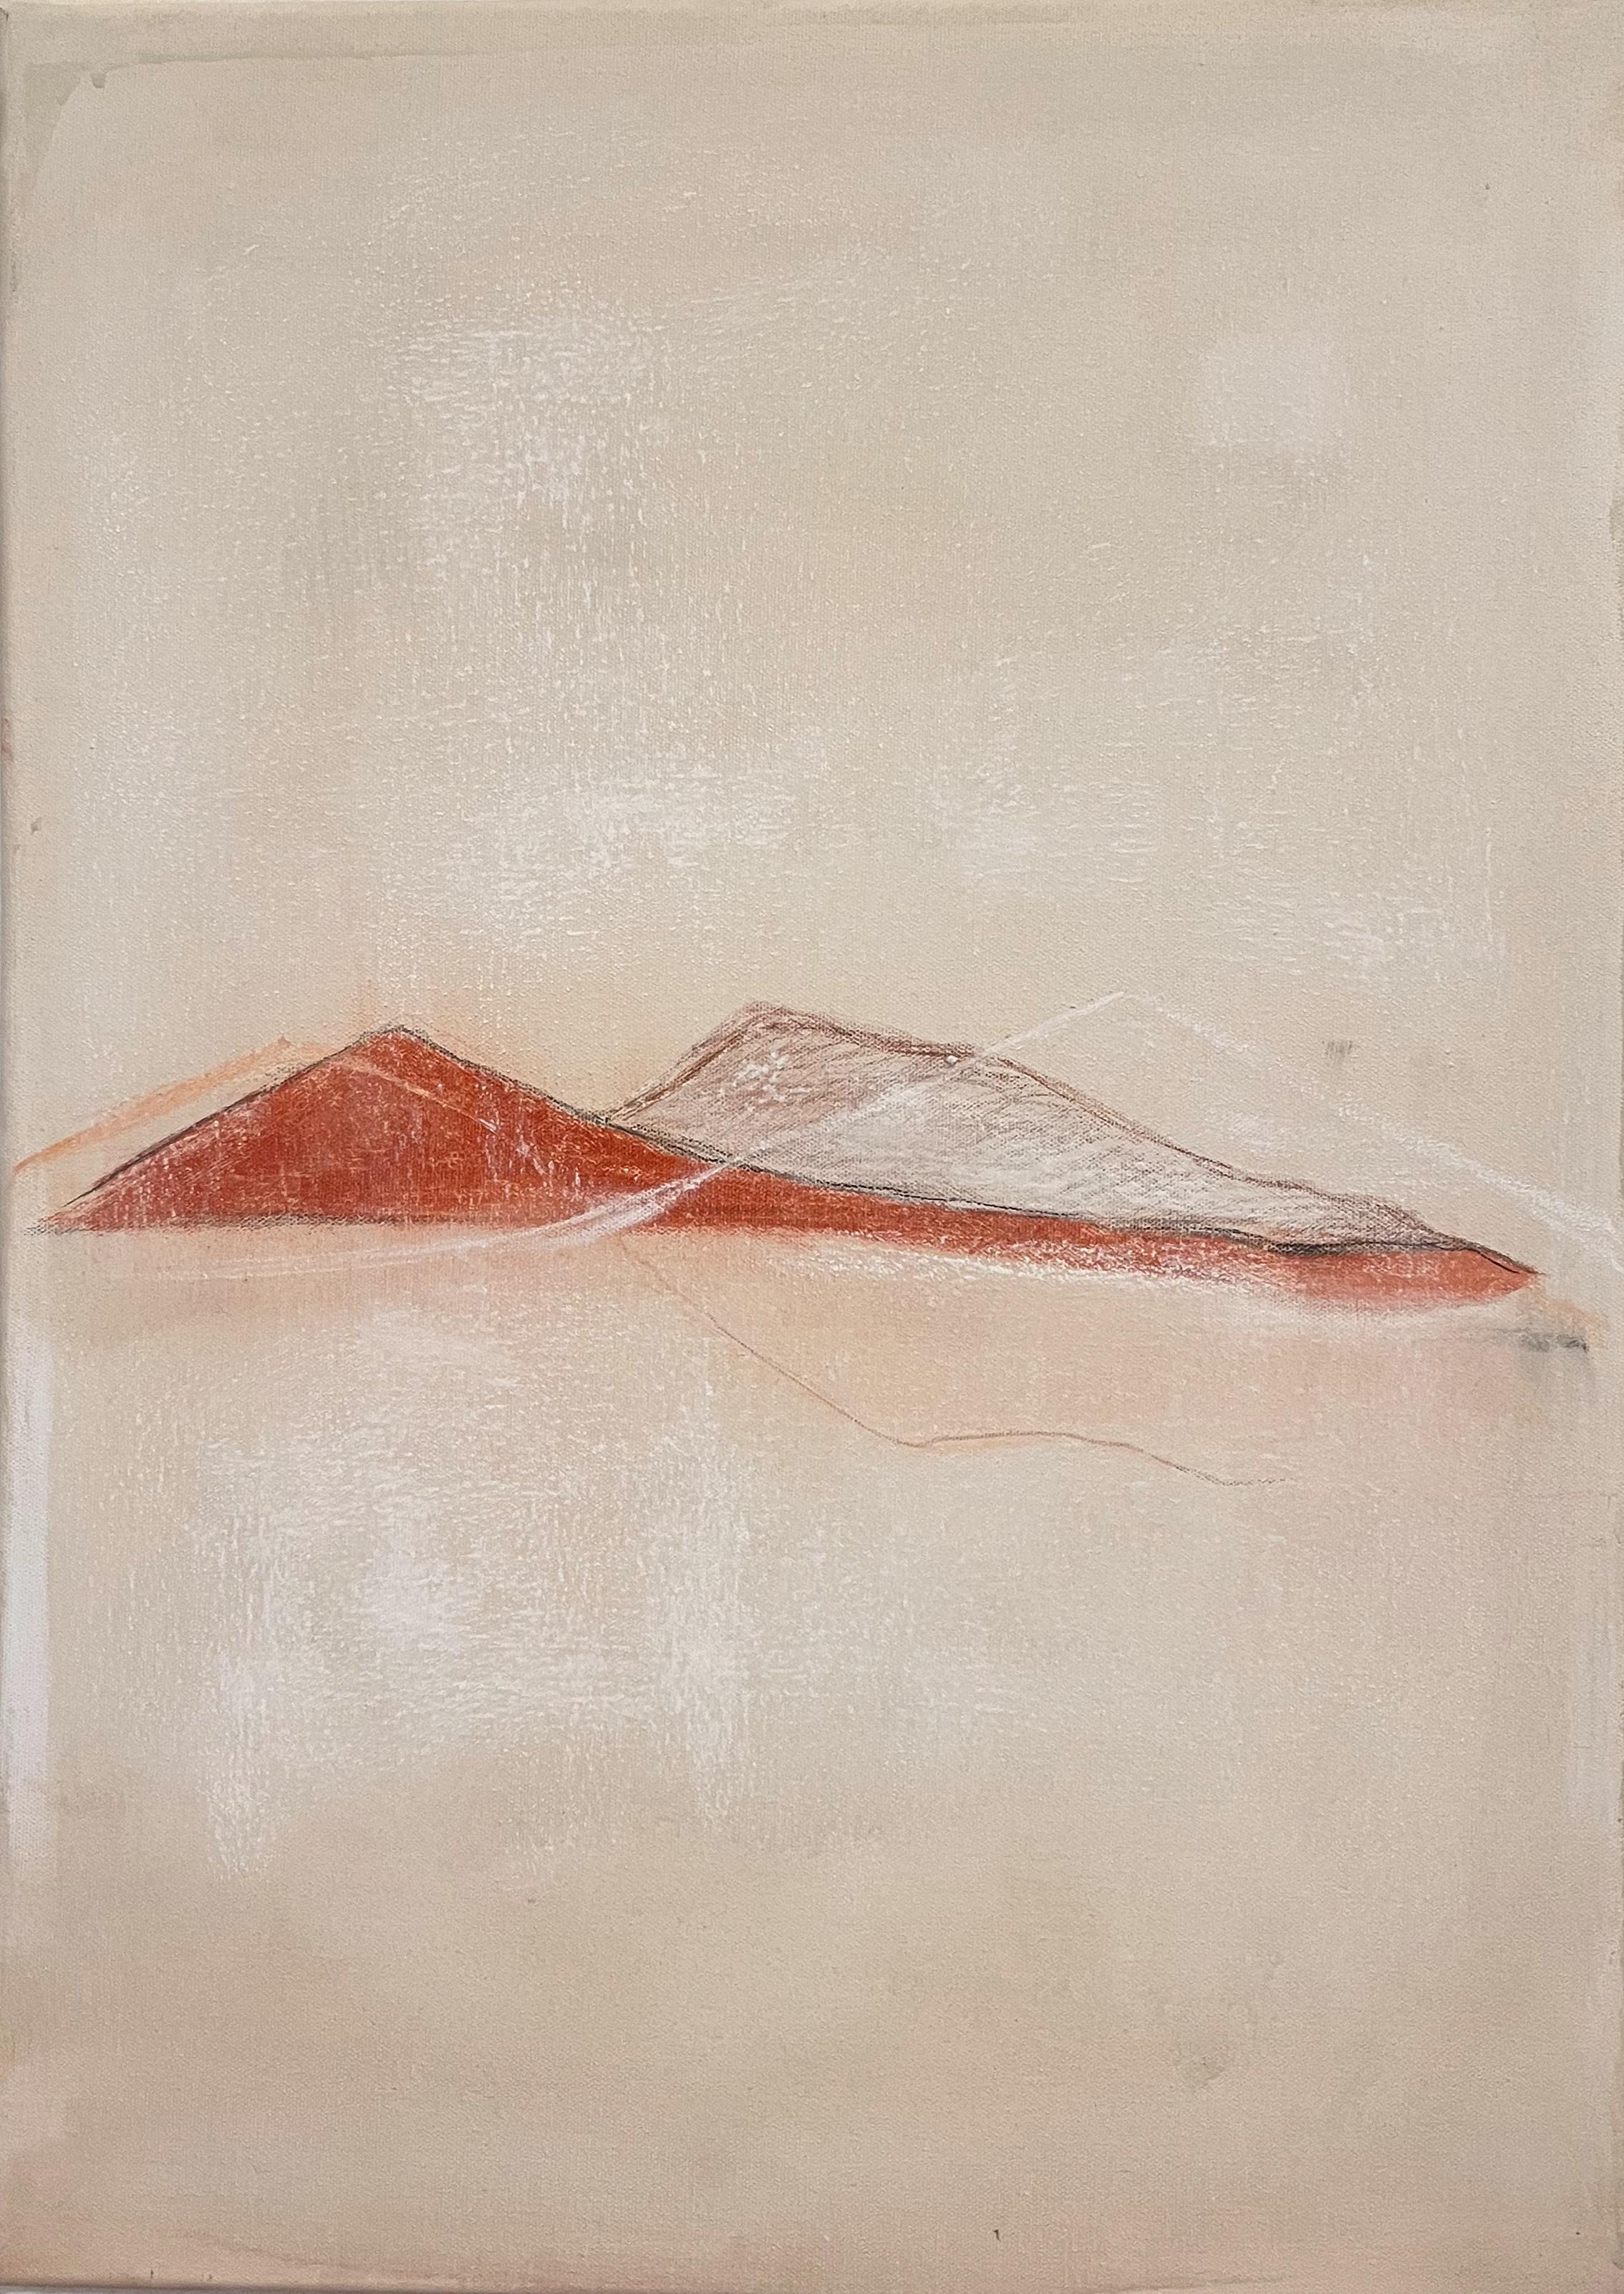 Landscape
mixed media on canvas
65x46 cm
2020
Ready to Hang

Marilina Marchica, born in 1984, was born in Agrigento, where she lives and works. She graduated in Painting at the Academy of Fine Arts in Bologna and at the Polytechnic University of